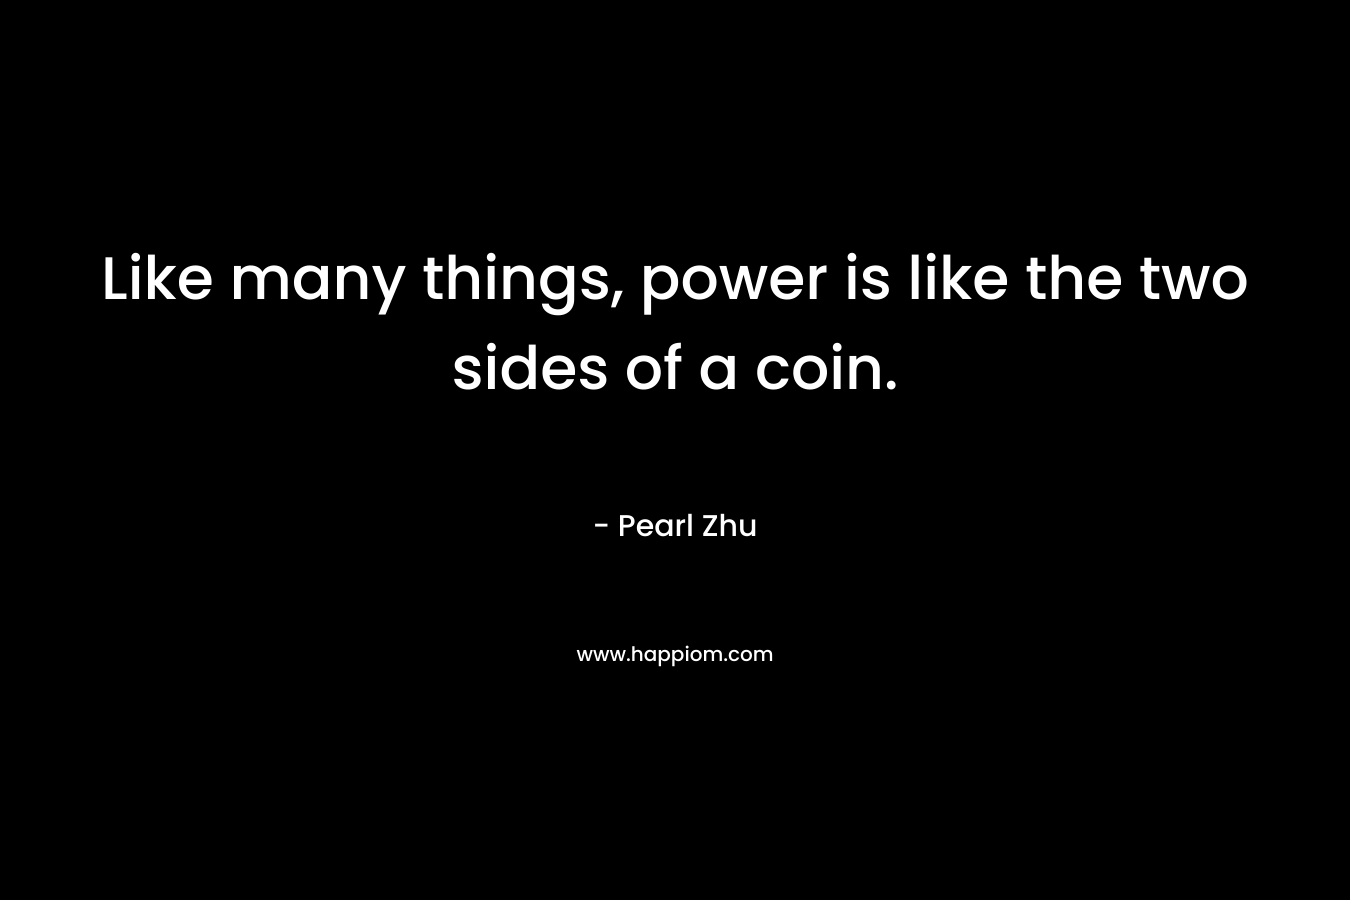 Like many things, power is like the two sides of a coin. – Pearl Zhu